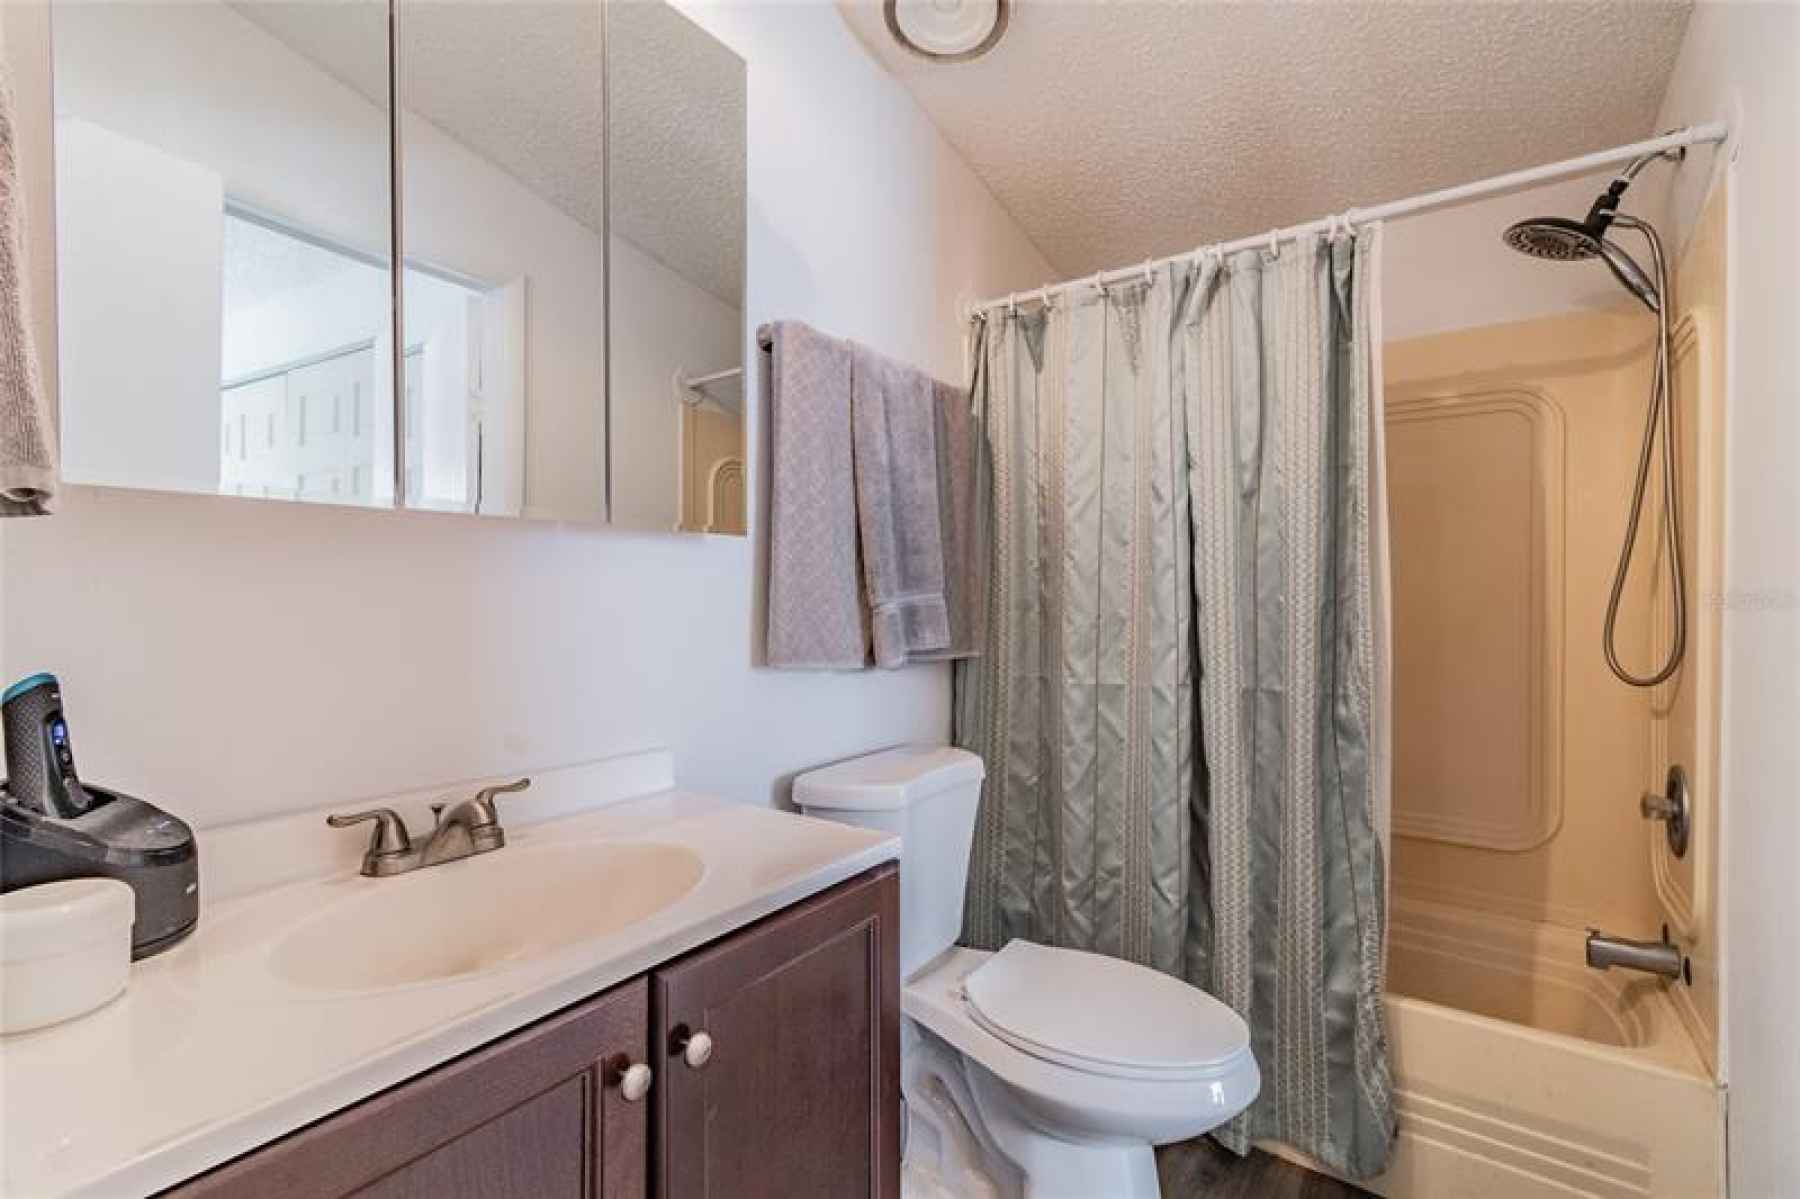 Guest ensuite bathroom with tub/shower combination.